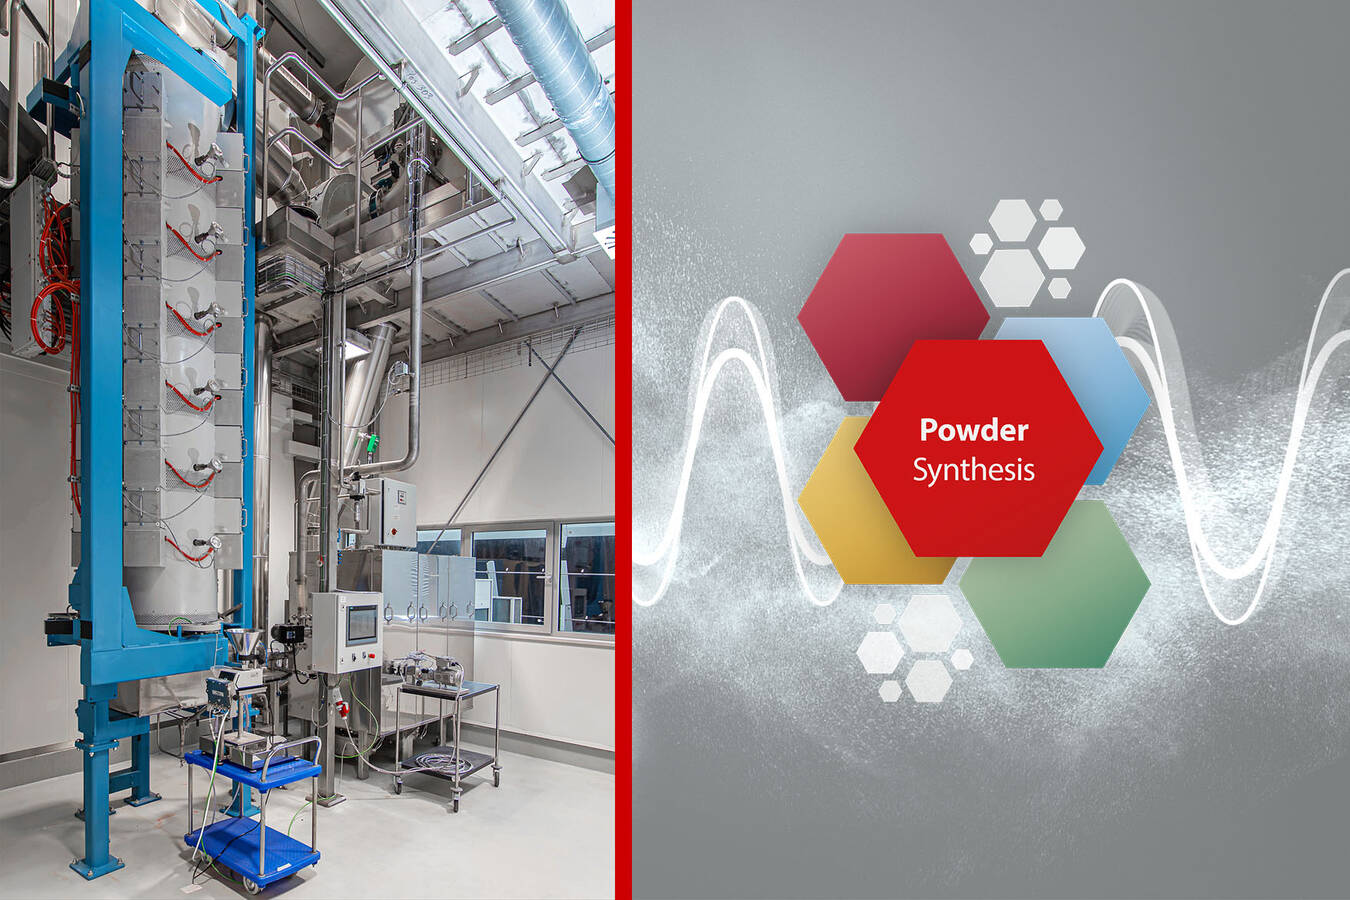 The new ProAPP® 80 HT powder synthesis plant at the Glatt site in Weimar, Germany